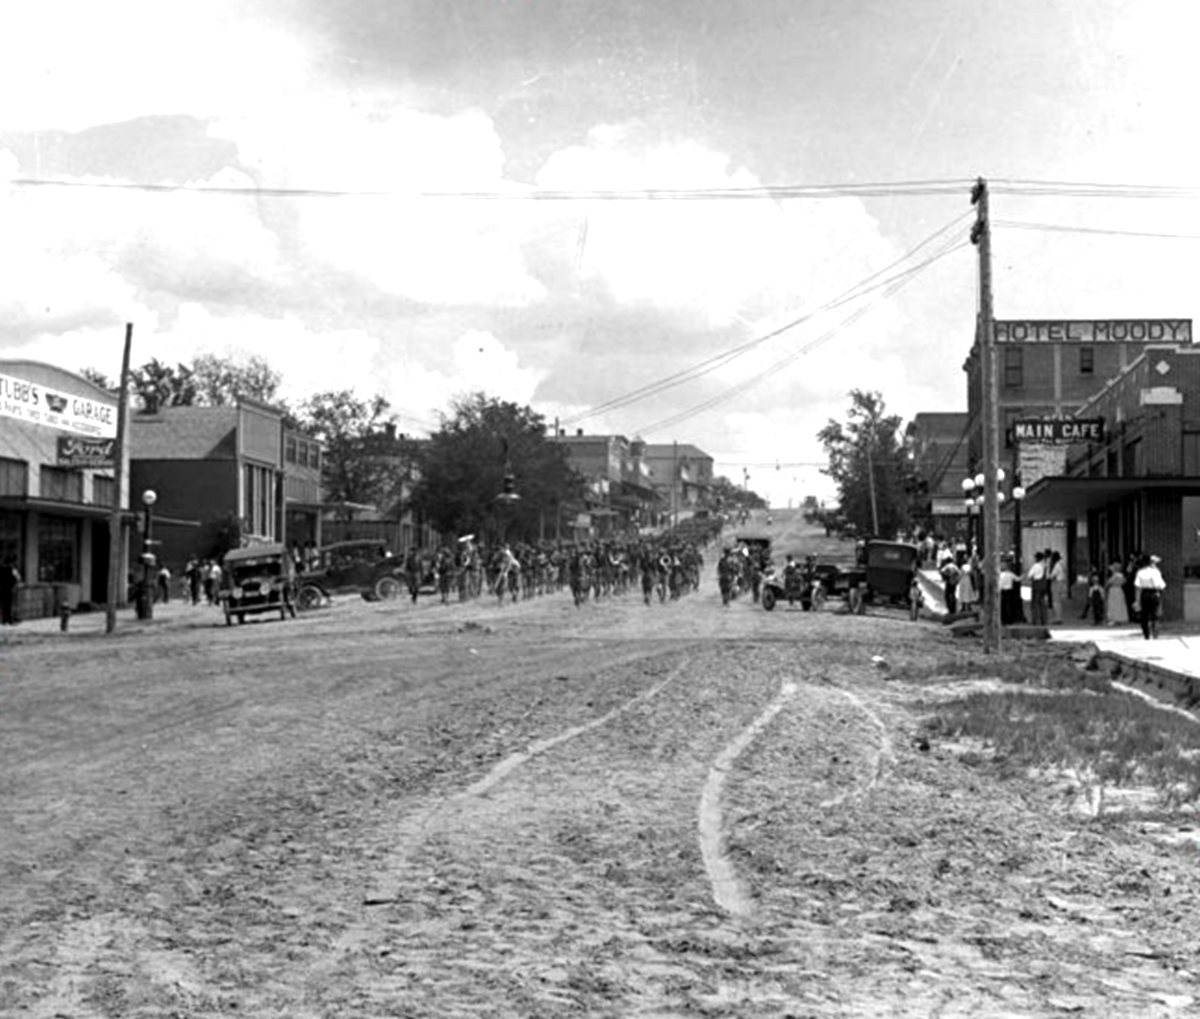 July 4 Parade in Canadian Texas in 1910